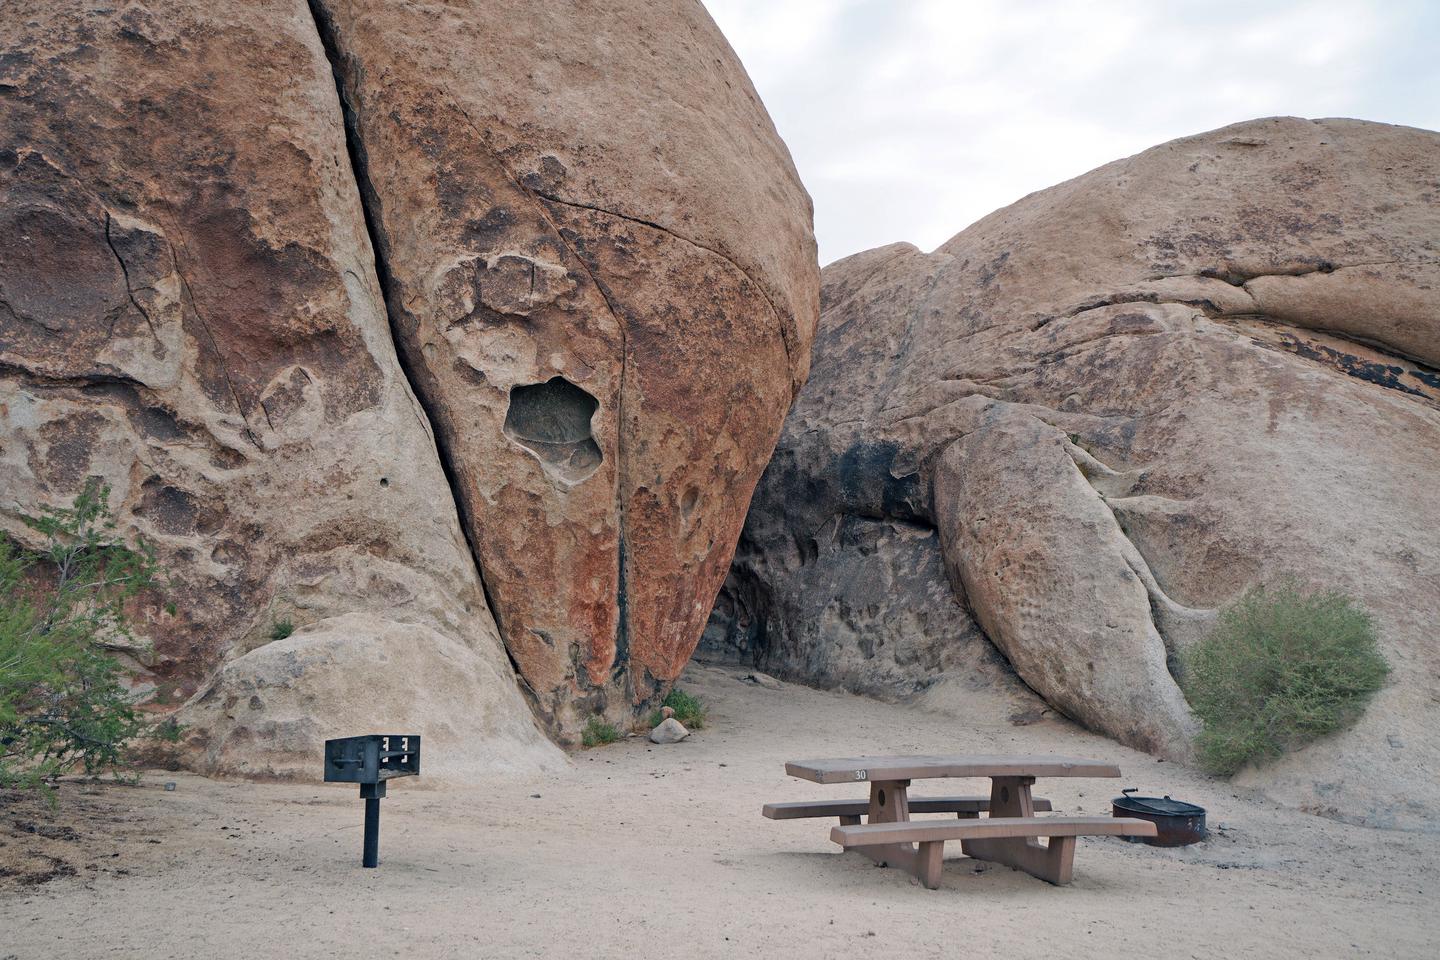 Campsite  with picnic table surrounded by boulders.Campsite.